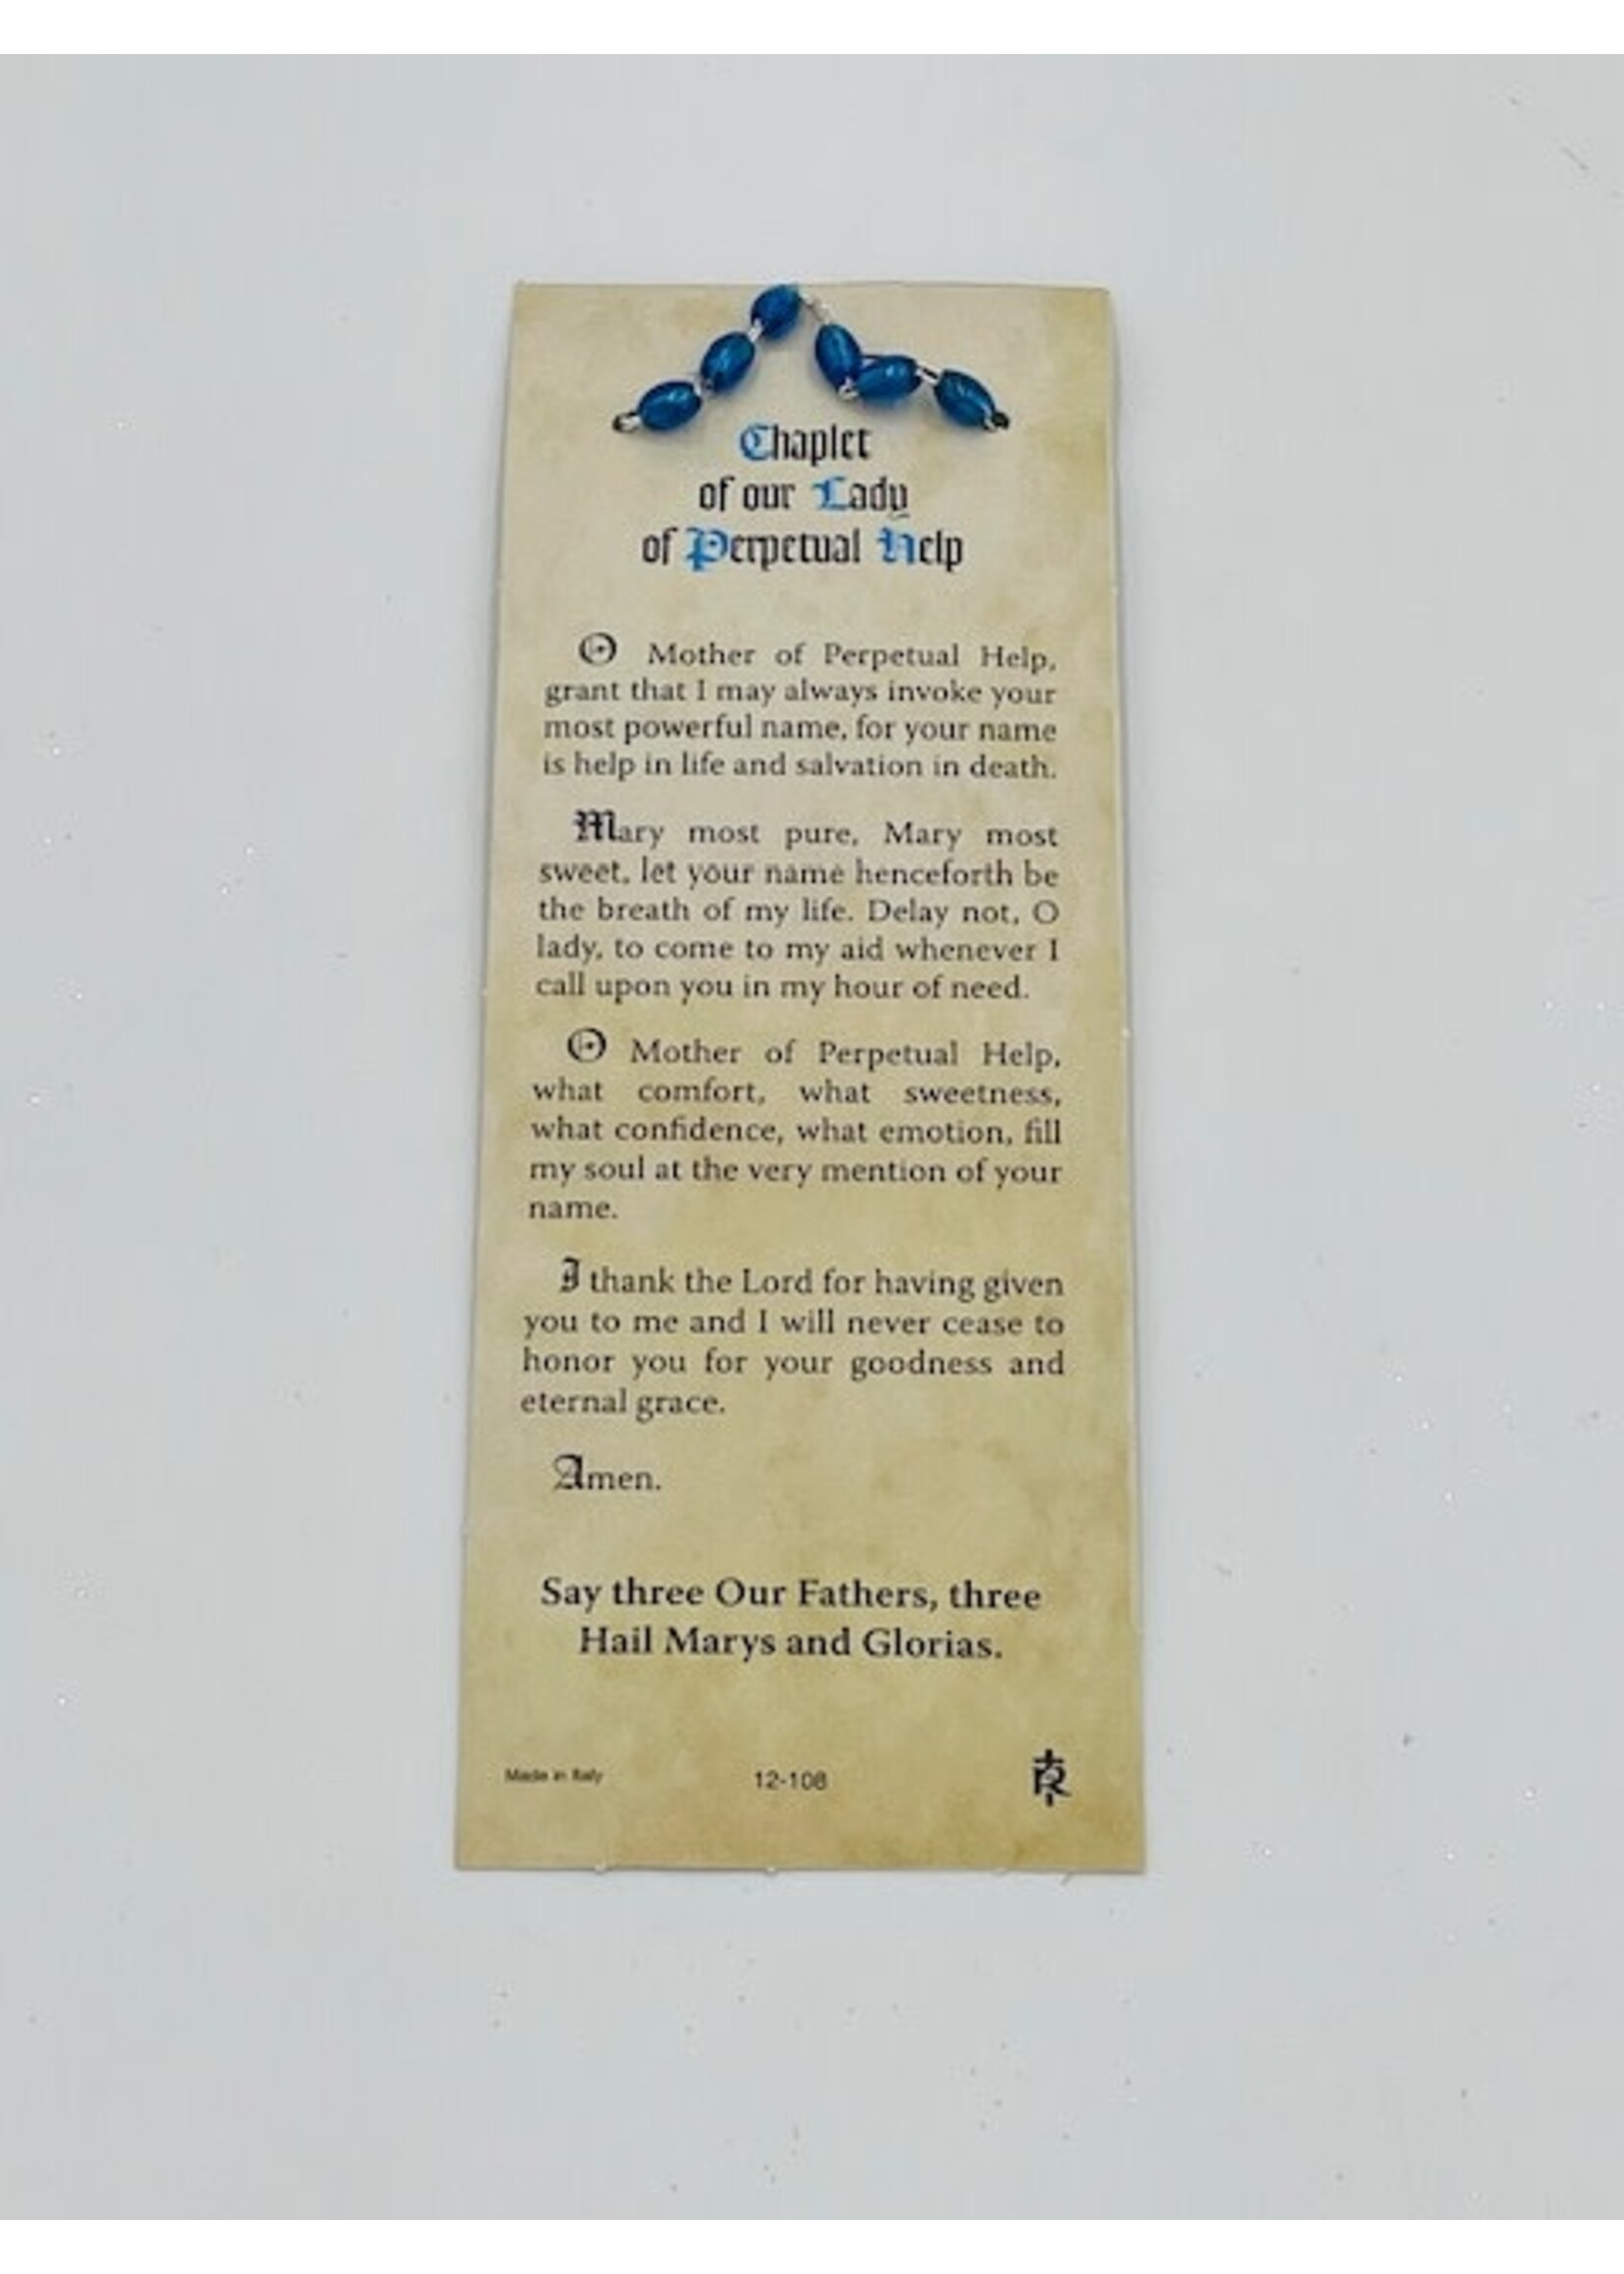 Chaplet of Our Lady of Perpetual Help